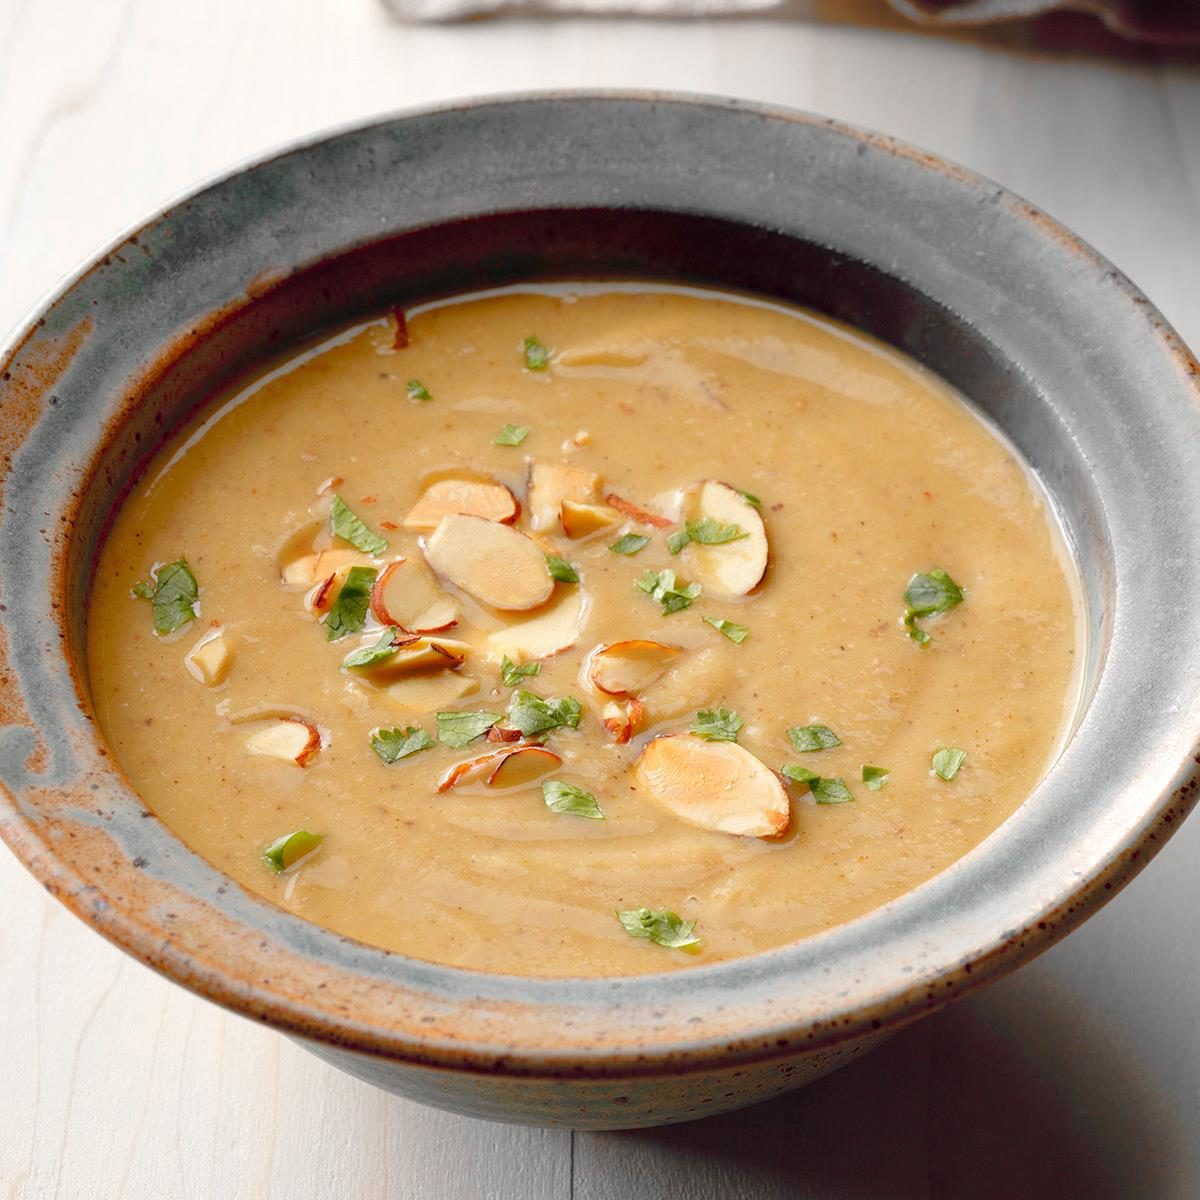 Moroccan Cauliflower And Almond Soup Exps Thd17 204728 B08 16 2b 10